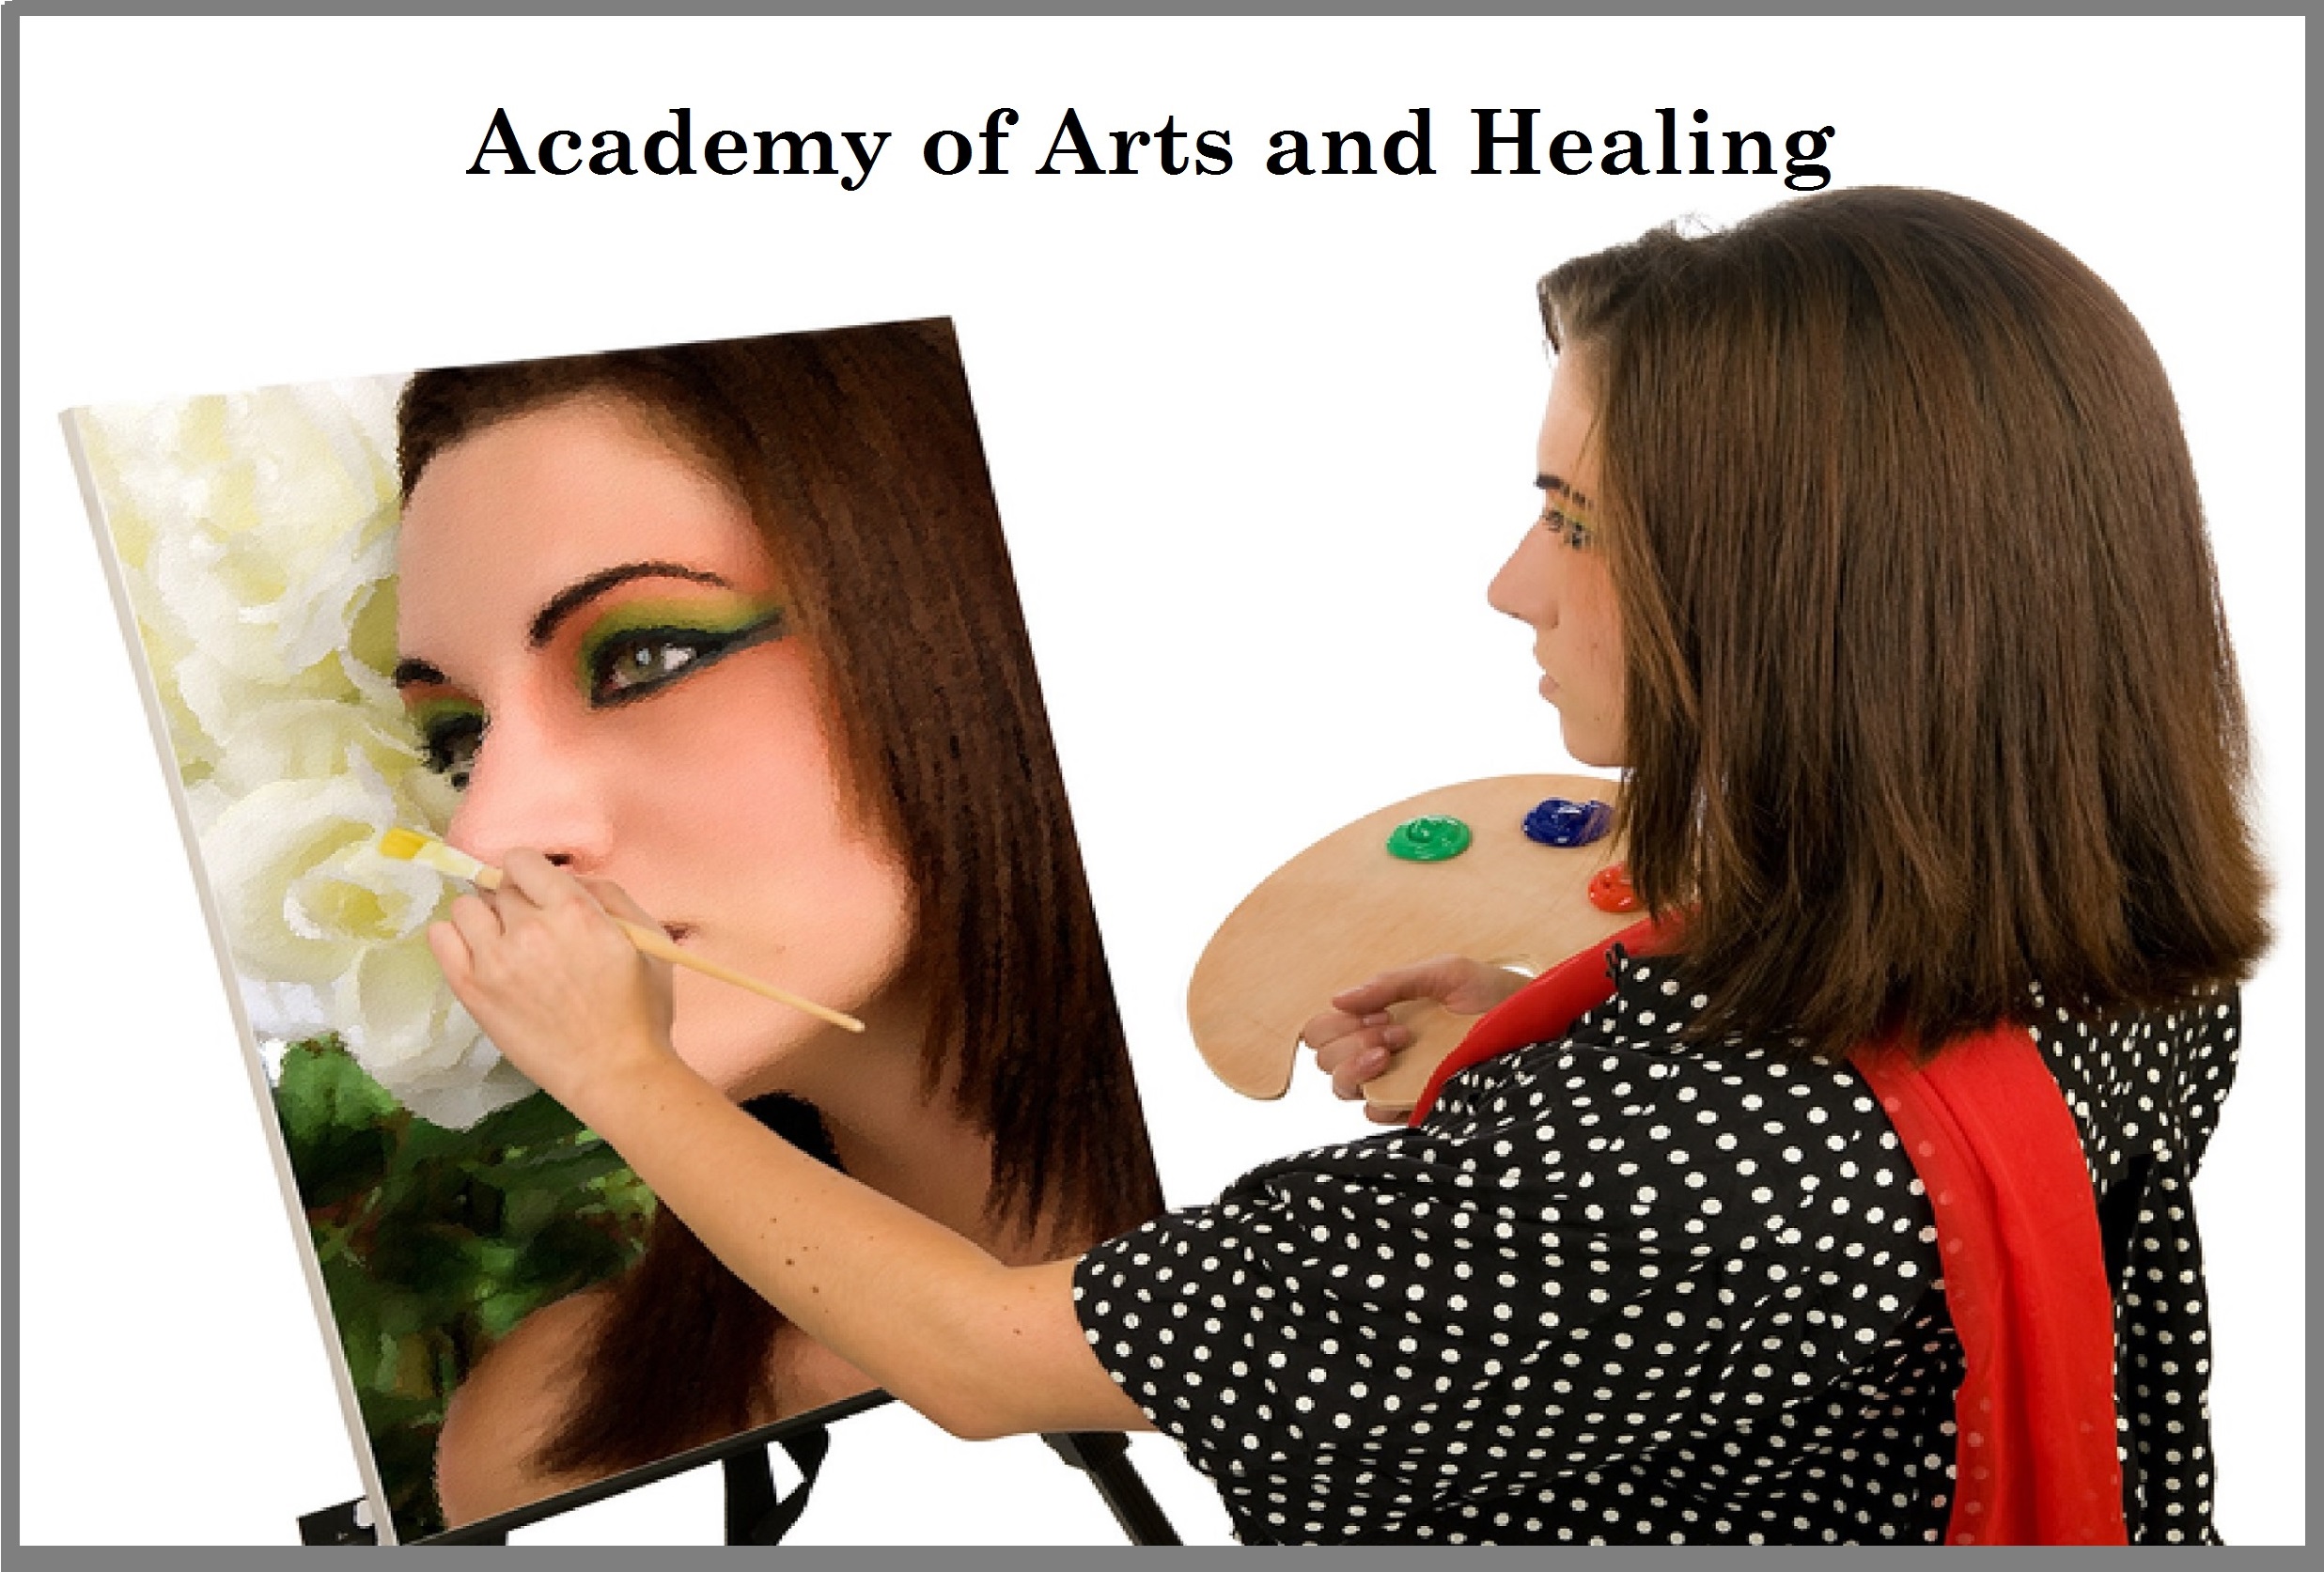 Academy of Arts and Healing